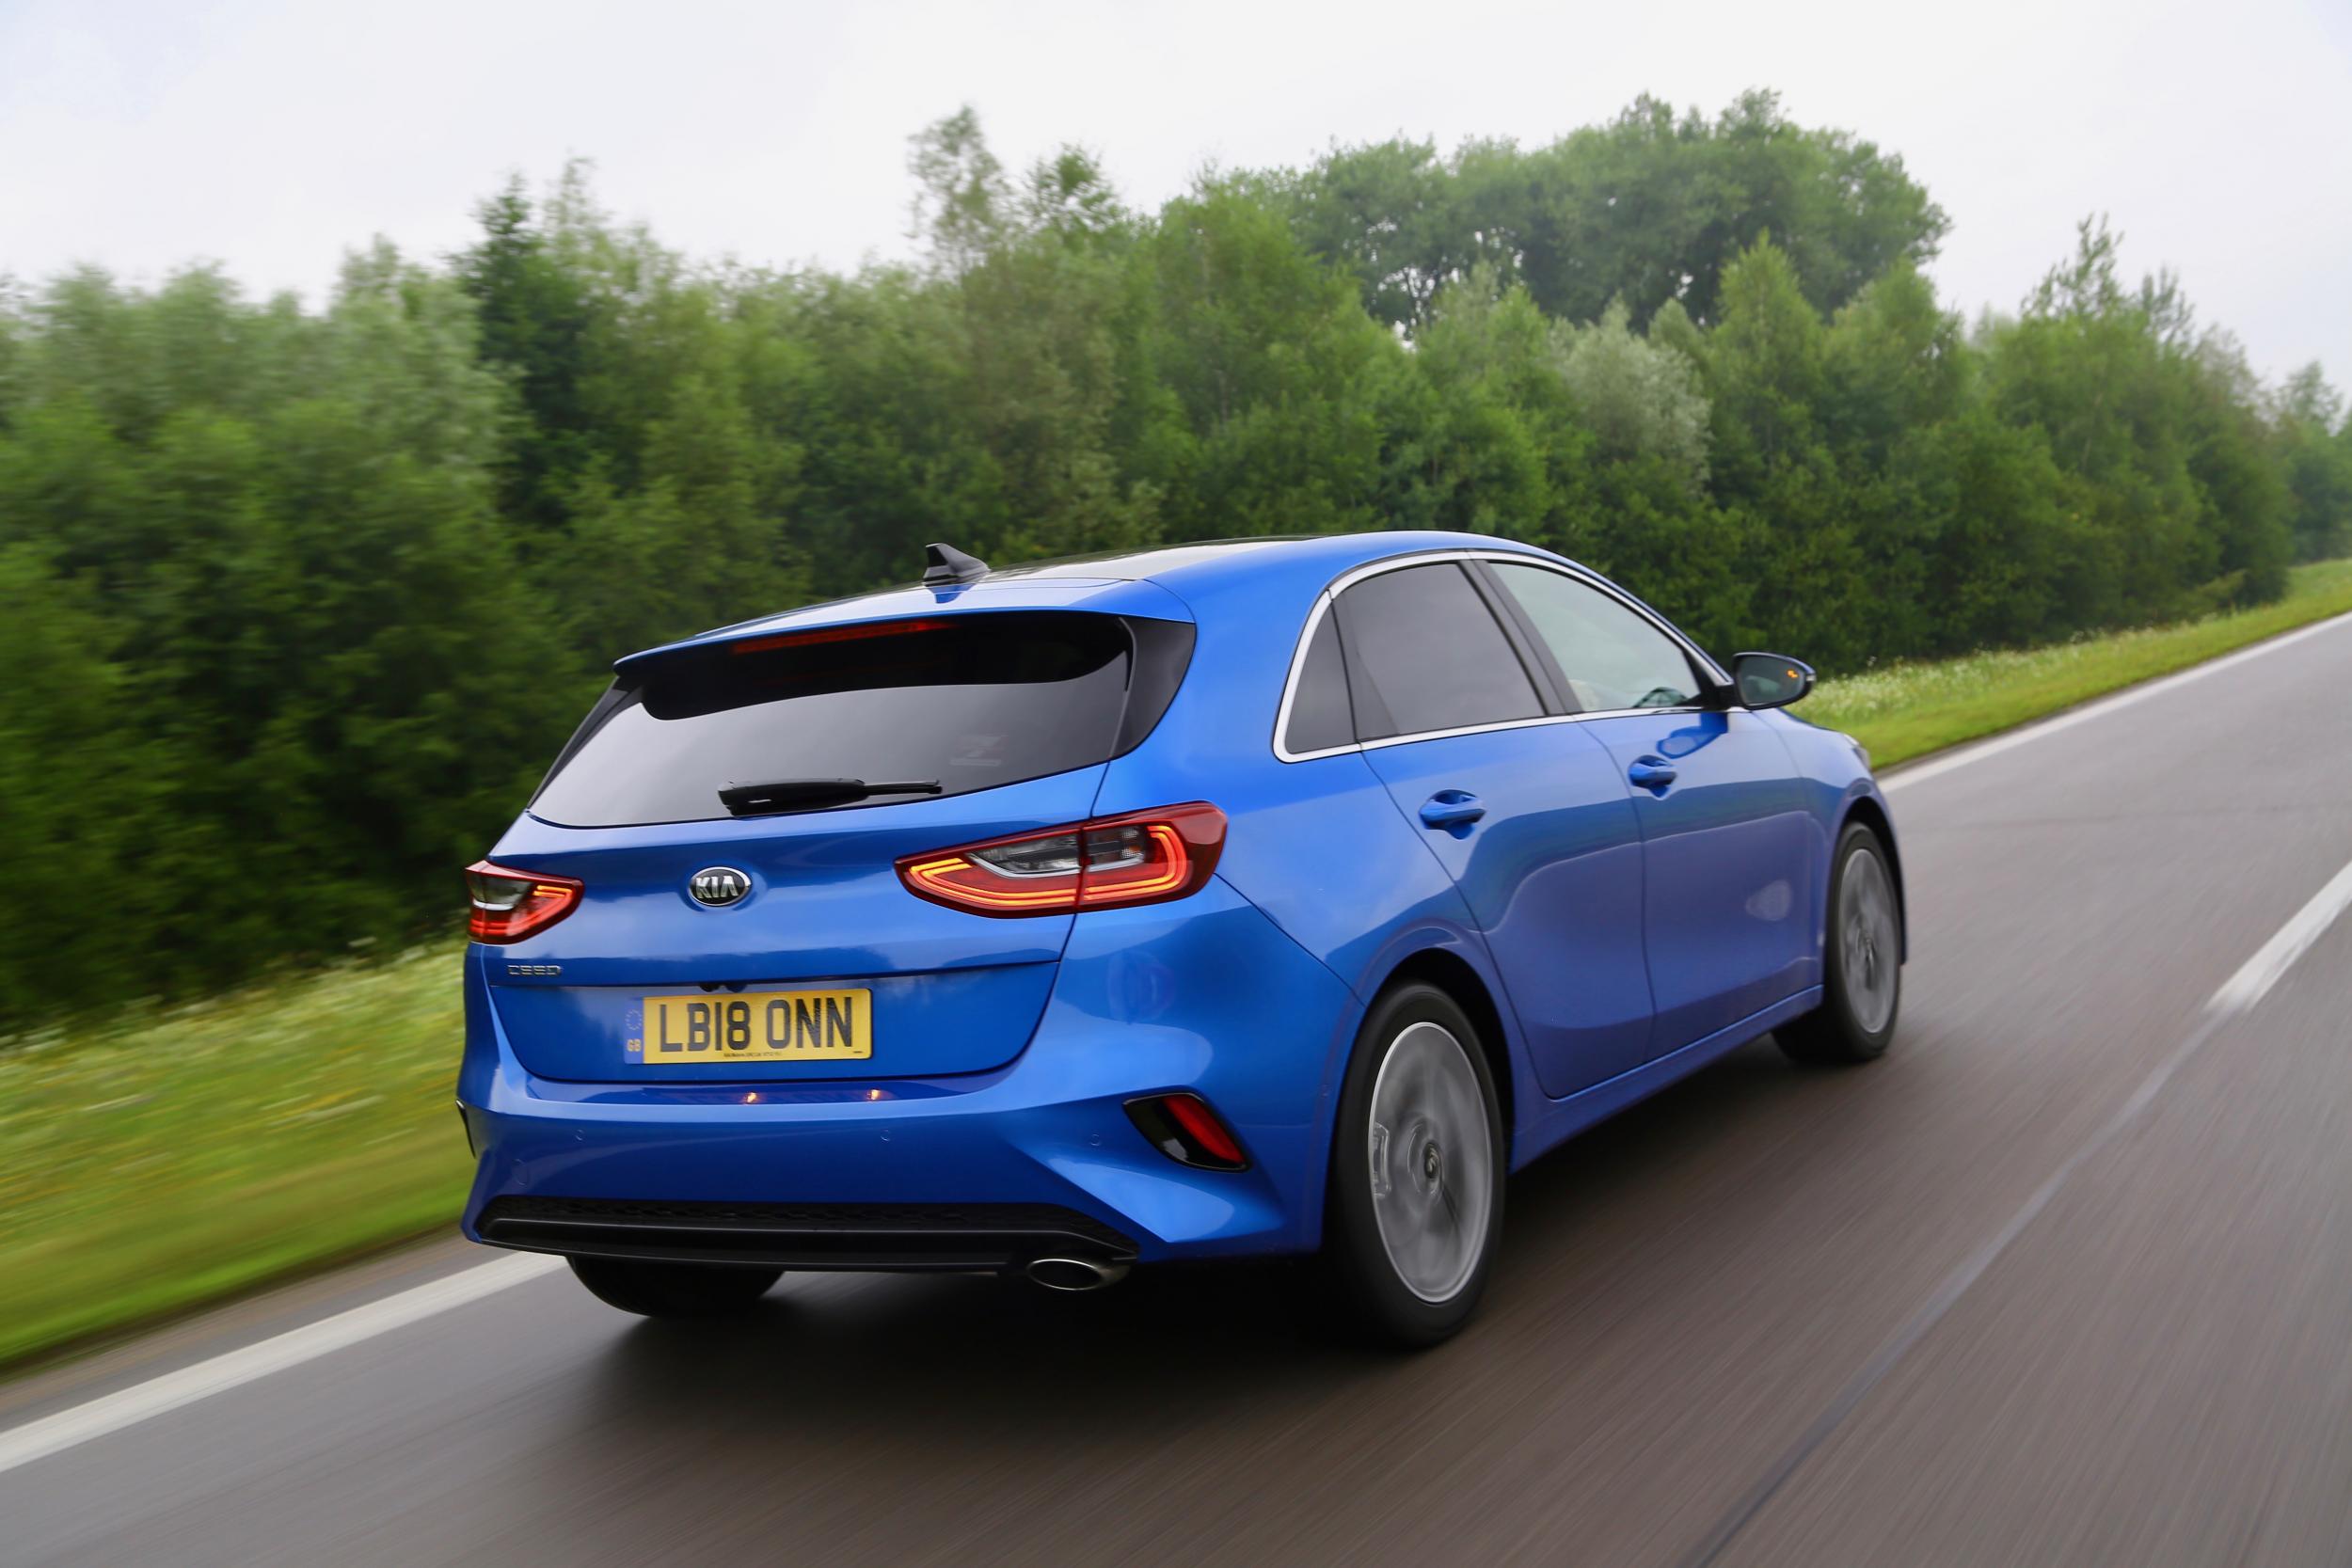 Kia Ceed car review: Perfectly competent family hatchback – just a little  dull, The Independent